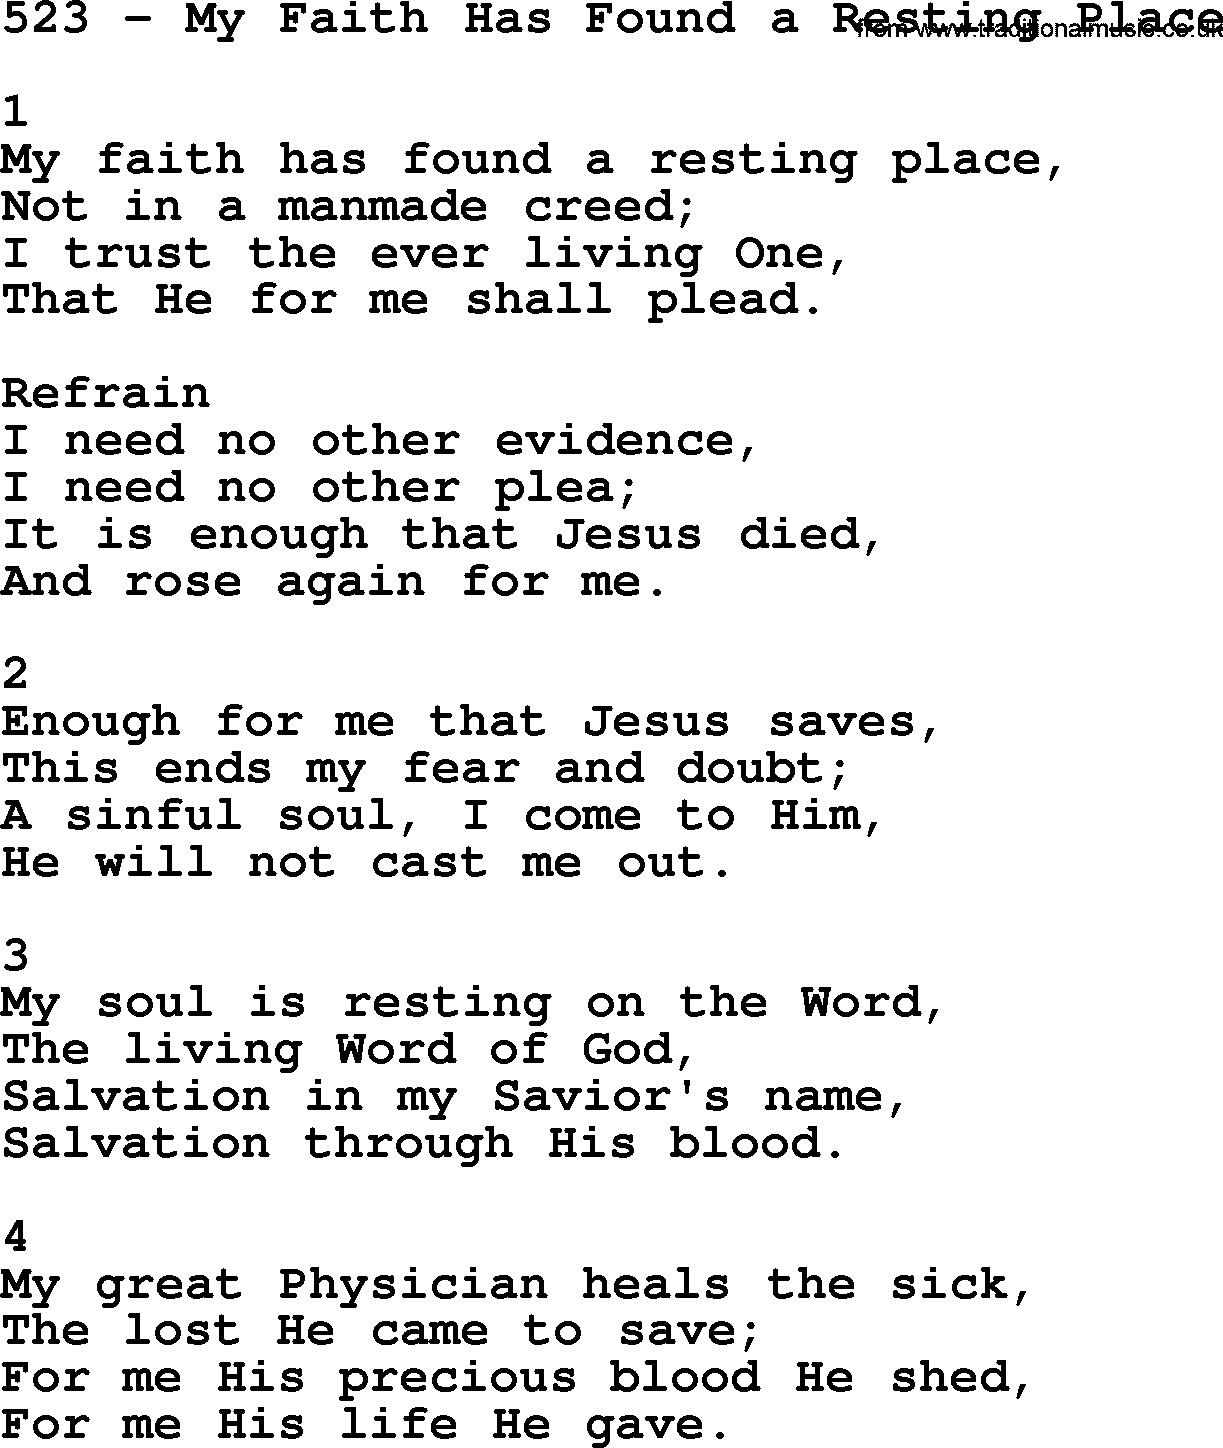 Complete Adventis Hymnal, title: 523-My Faith Has Found A Resting Place, with lyrics, midi, mp3, powerpoints(PPT) and PDF,